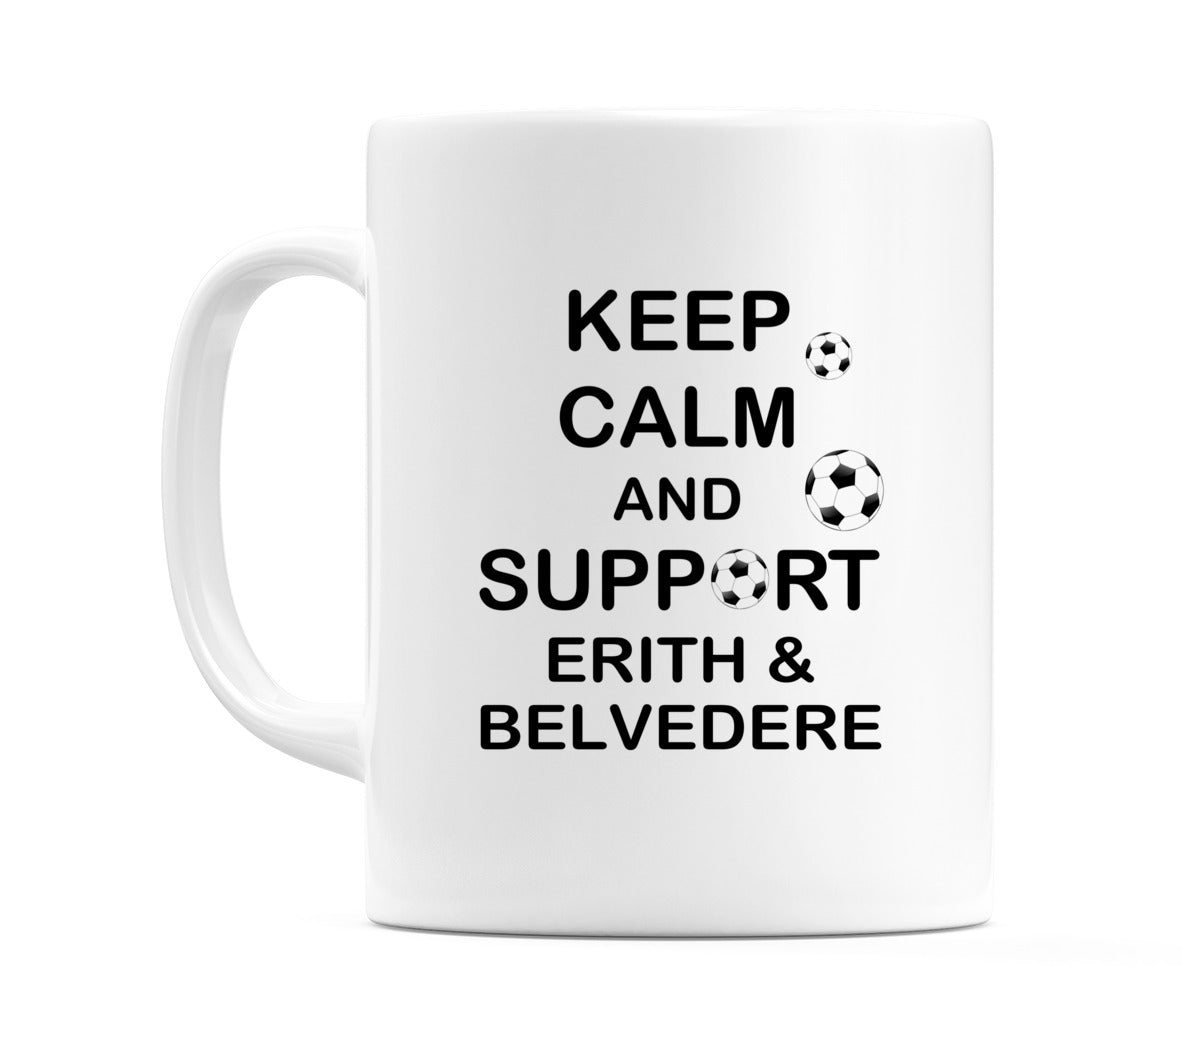 Keep Calm And Support Erith & Belvedere Mug